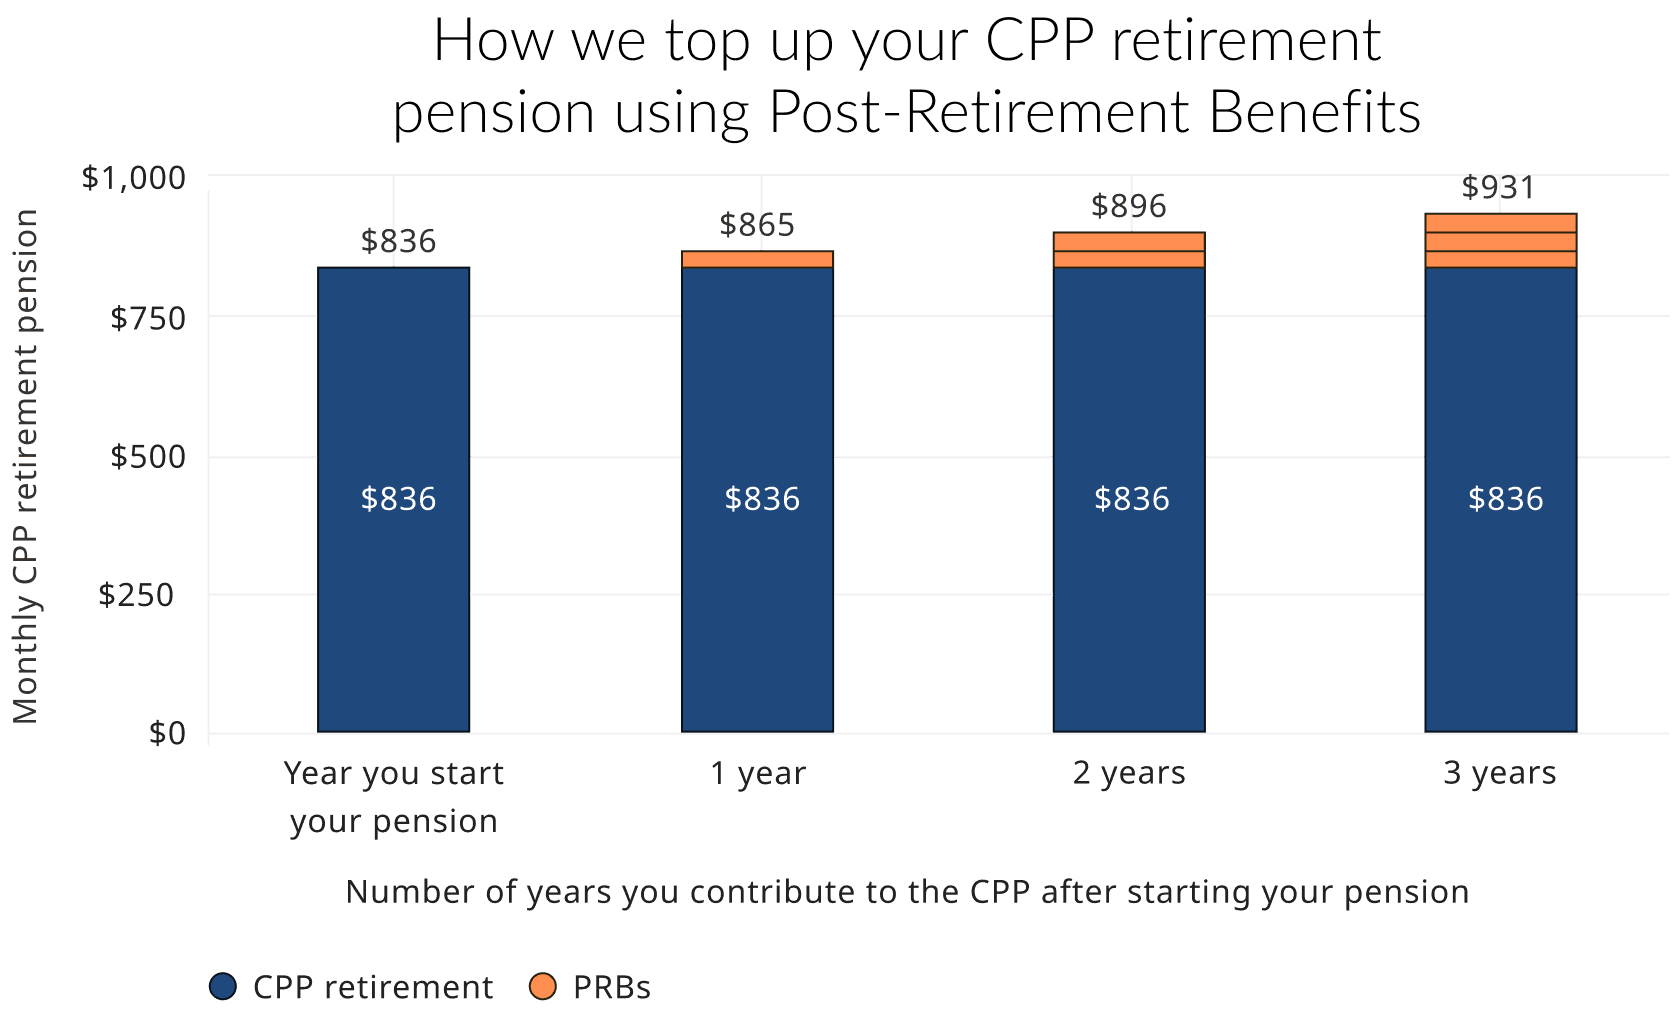 The chart shows changes in monthly payments for people who work for 3 years after starting their CPP retirement pension. It shows that PRBs are added every year to your CPP retirement pension after you continue working and contributing to the plan.